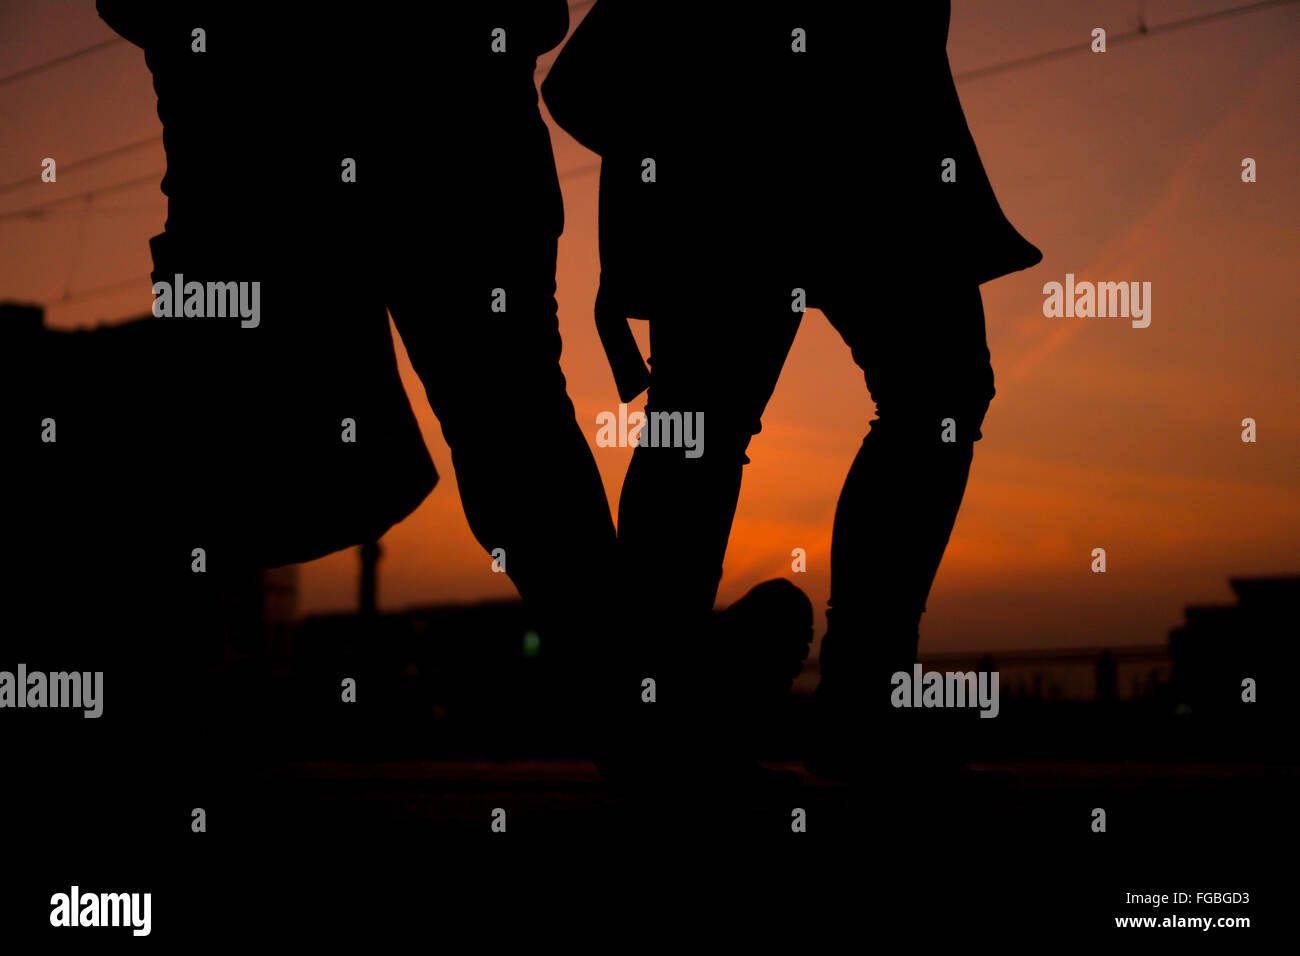 Low Section Of Silhouette People Walking On Footpath At Sunset Stock Photo